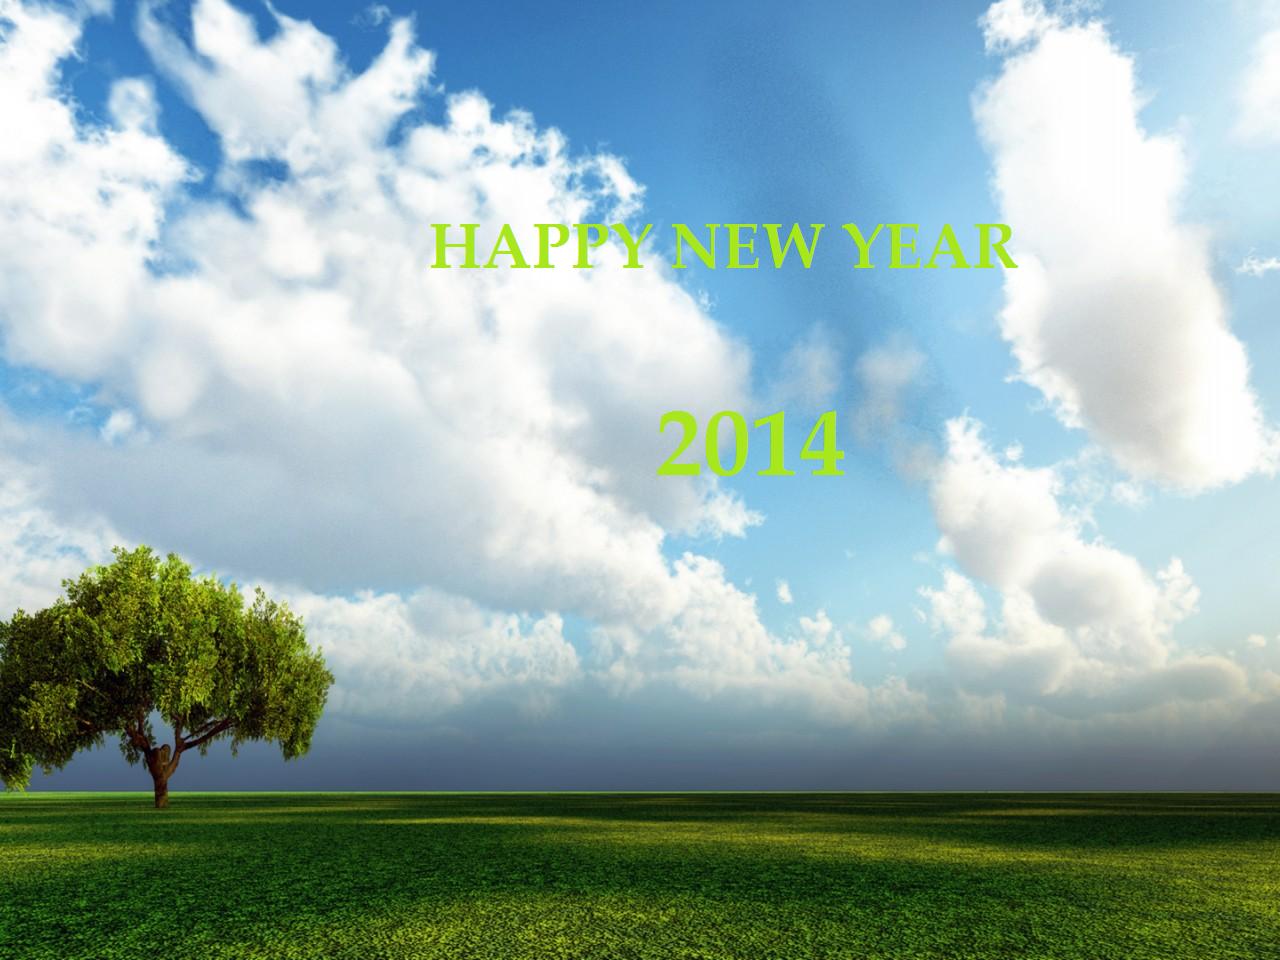 Happy New Year 2014 Wallpapers Pictures Cards Wishes Greetings ...